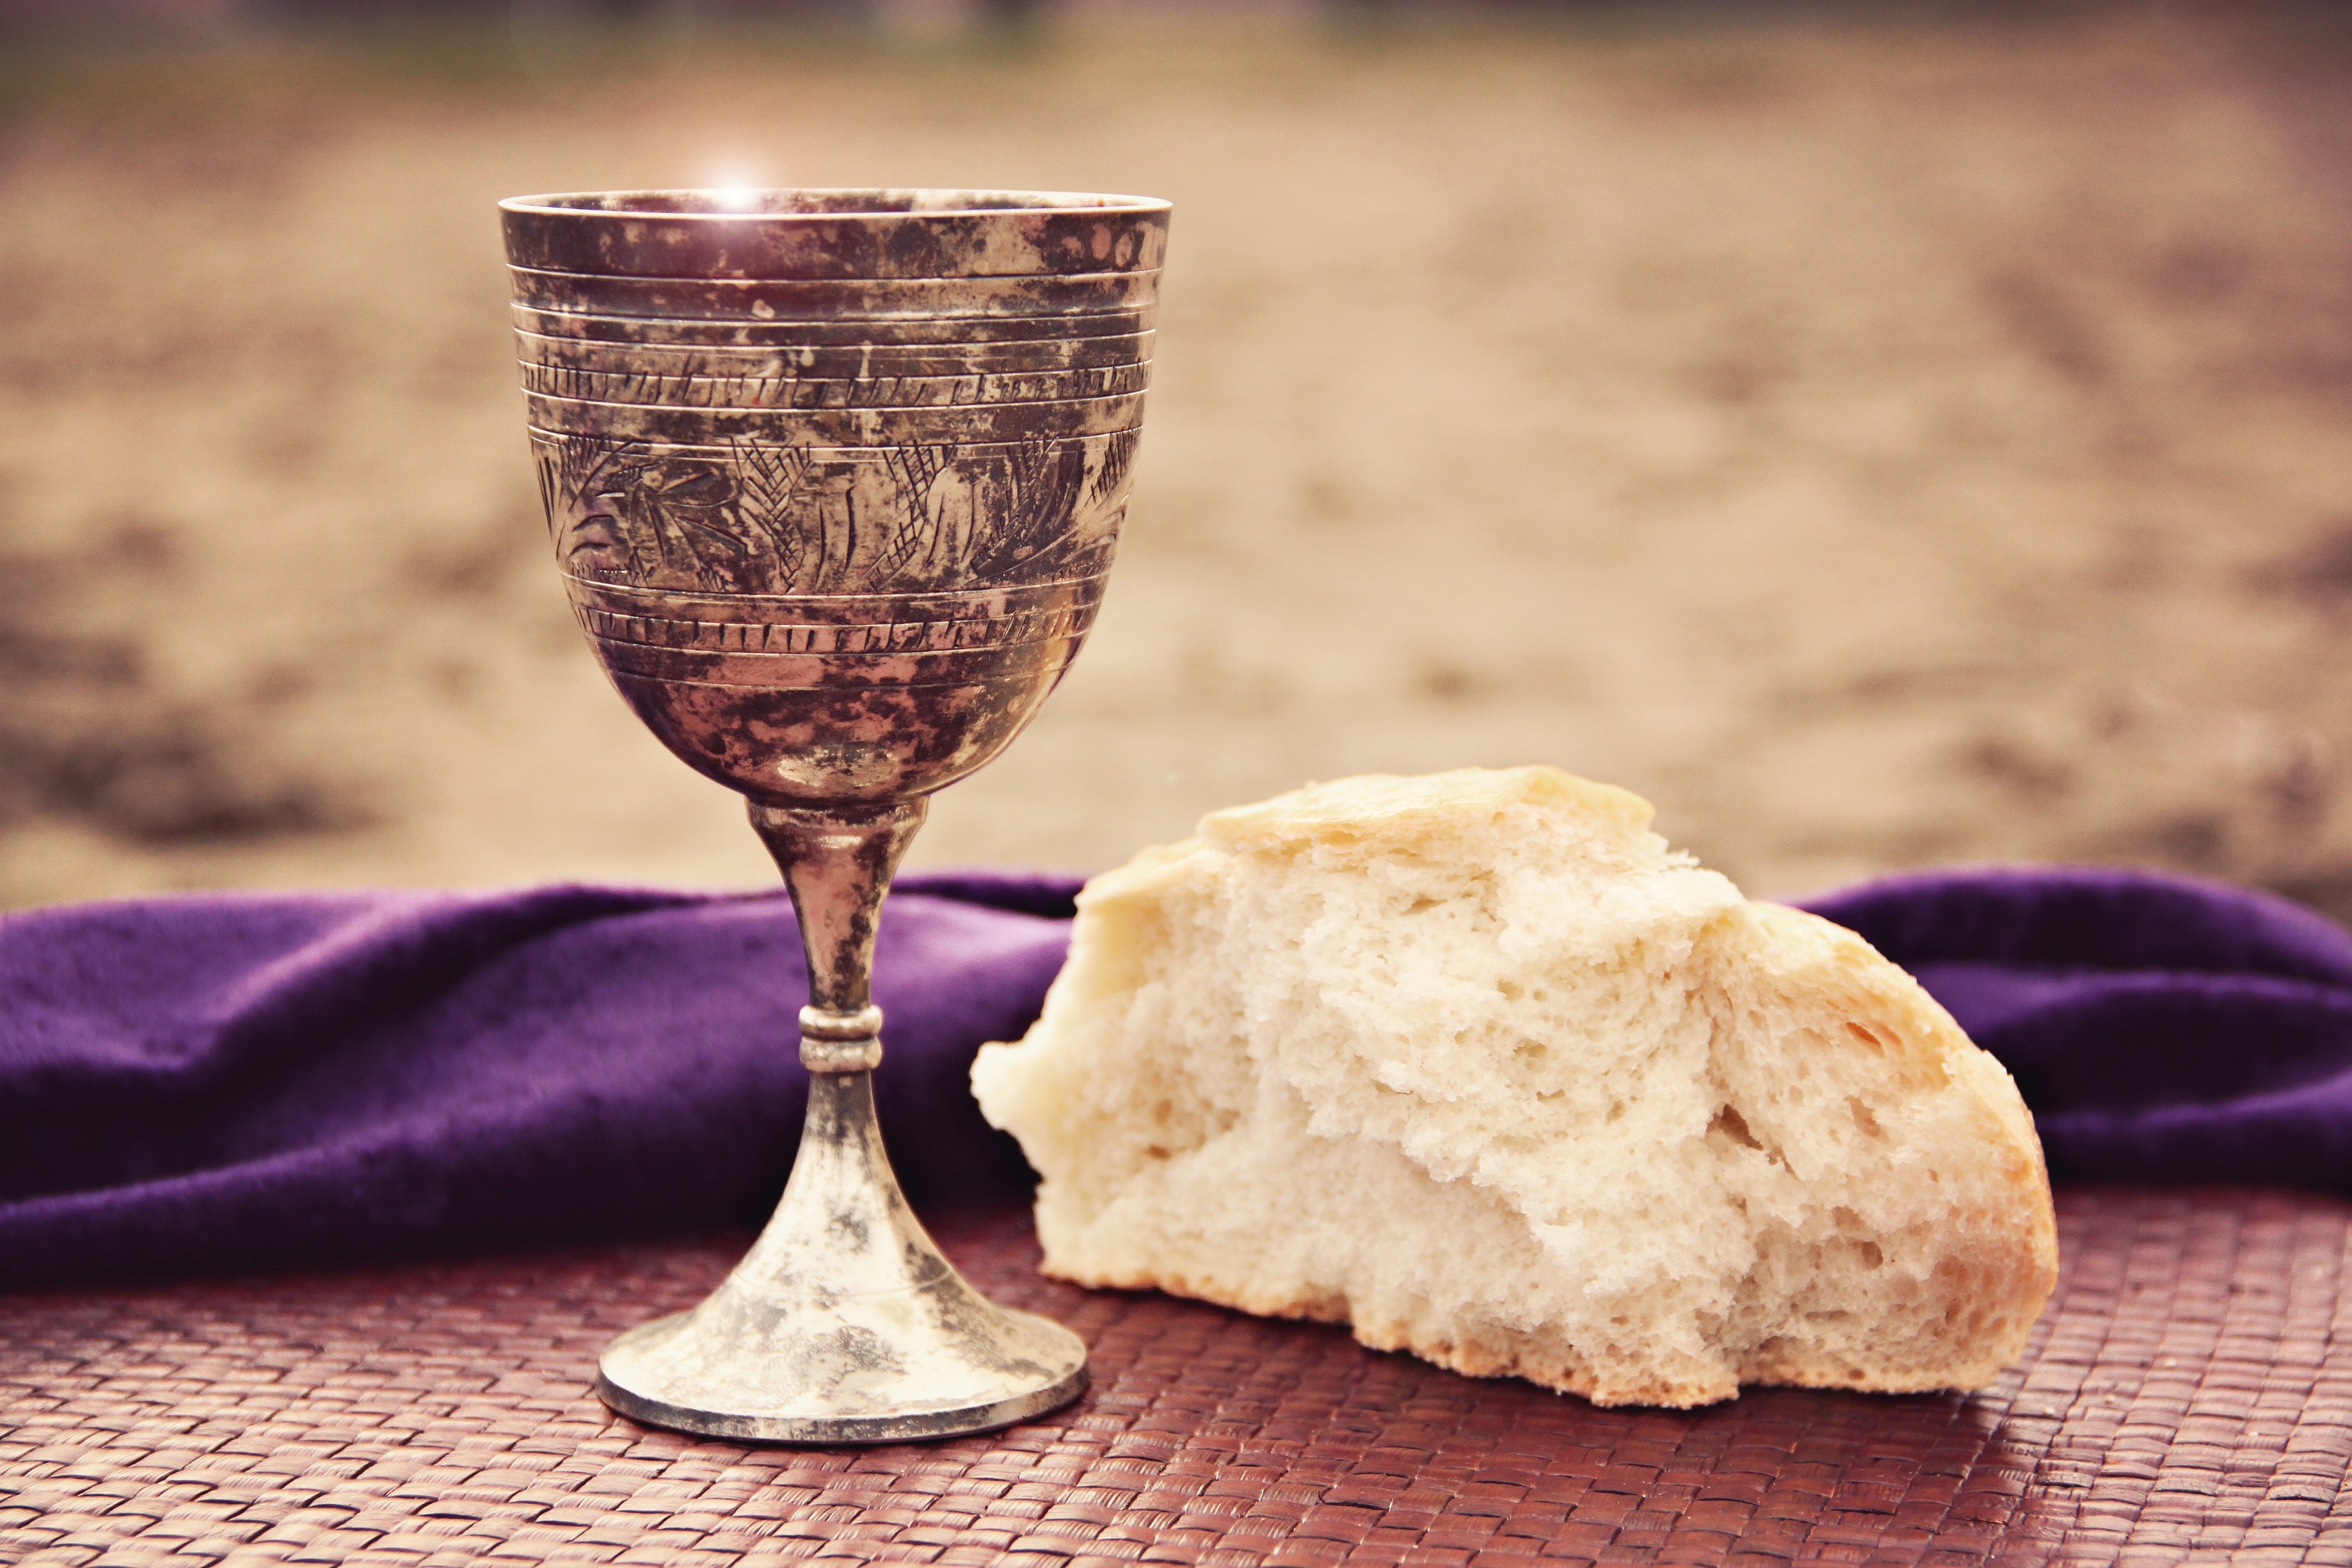 Lord S Supper Church Stock Photos